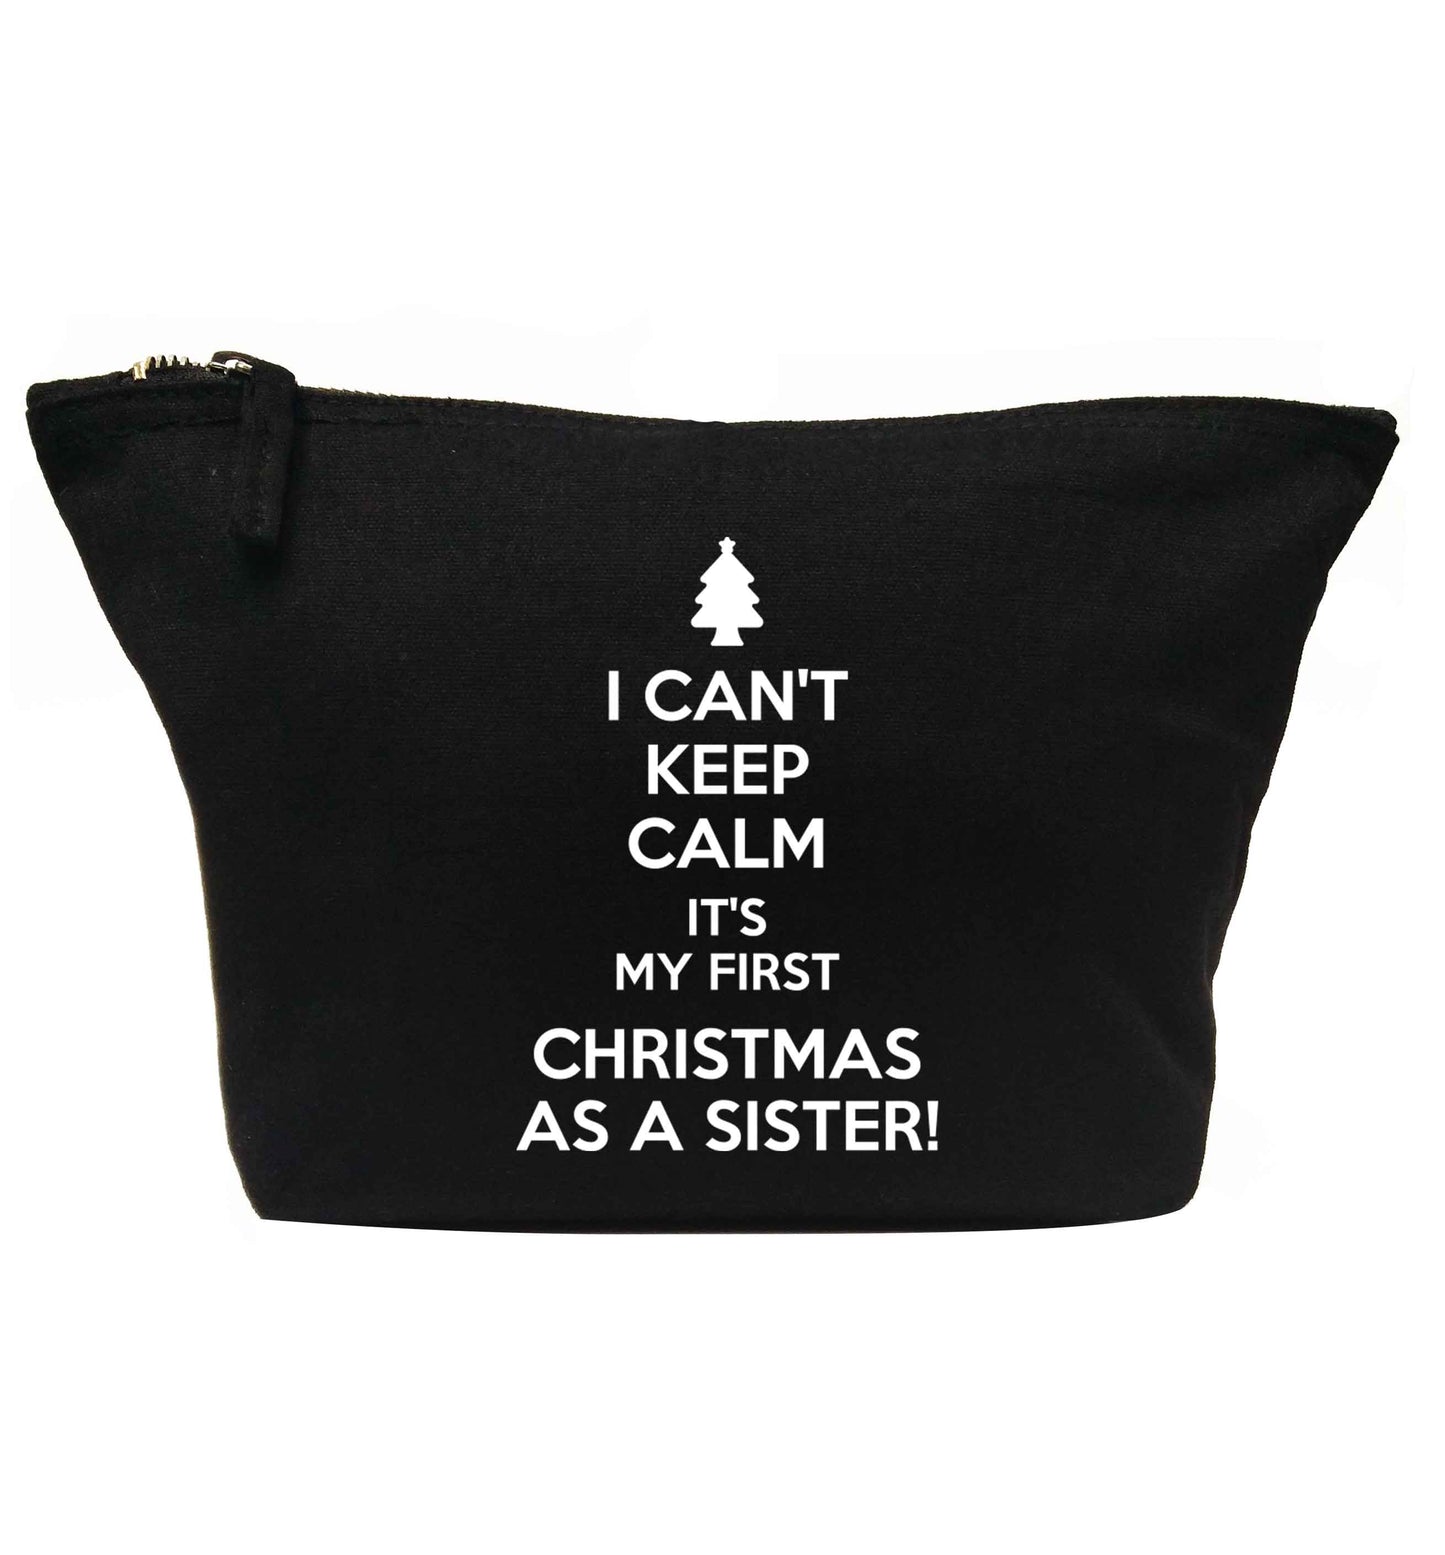 I can't keep calm it's my first Christmas as a sister! | makeup / wash bag